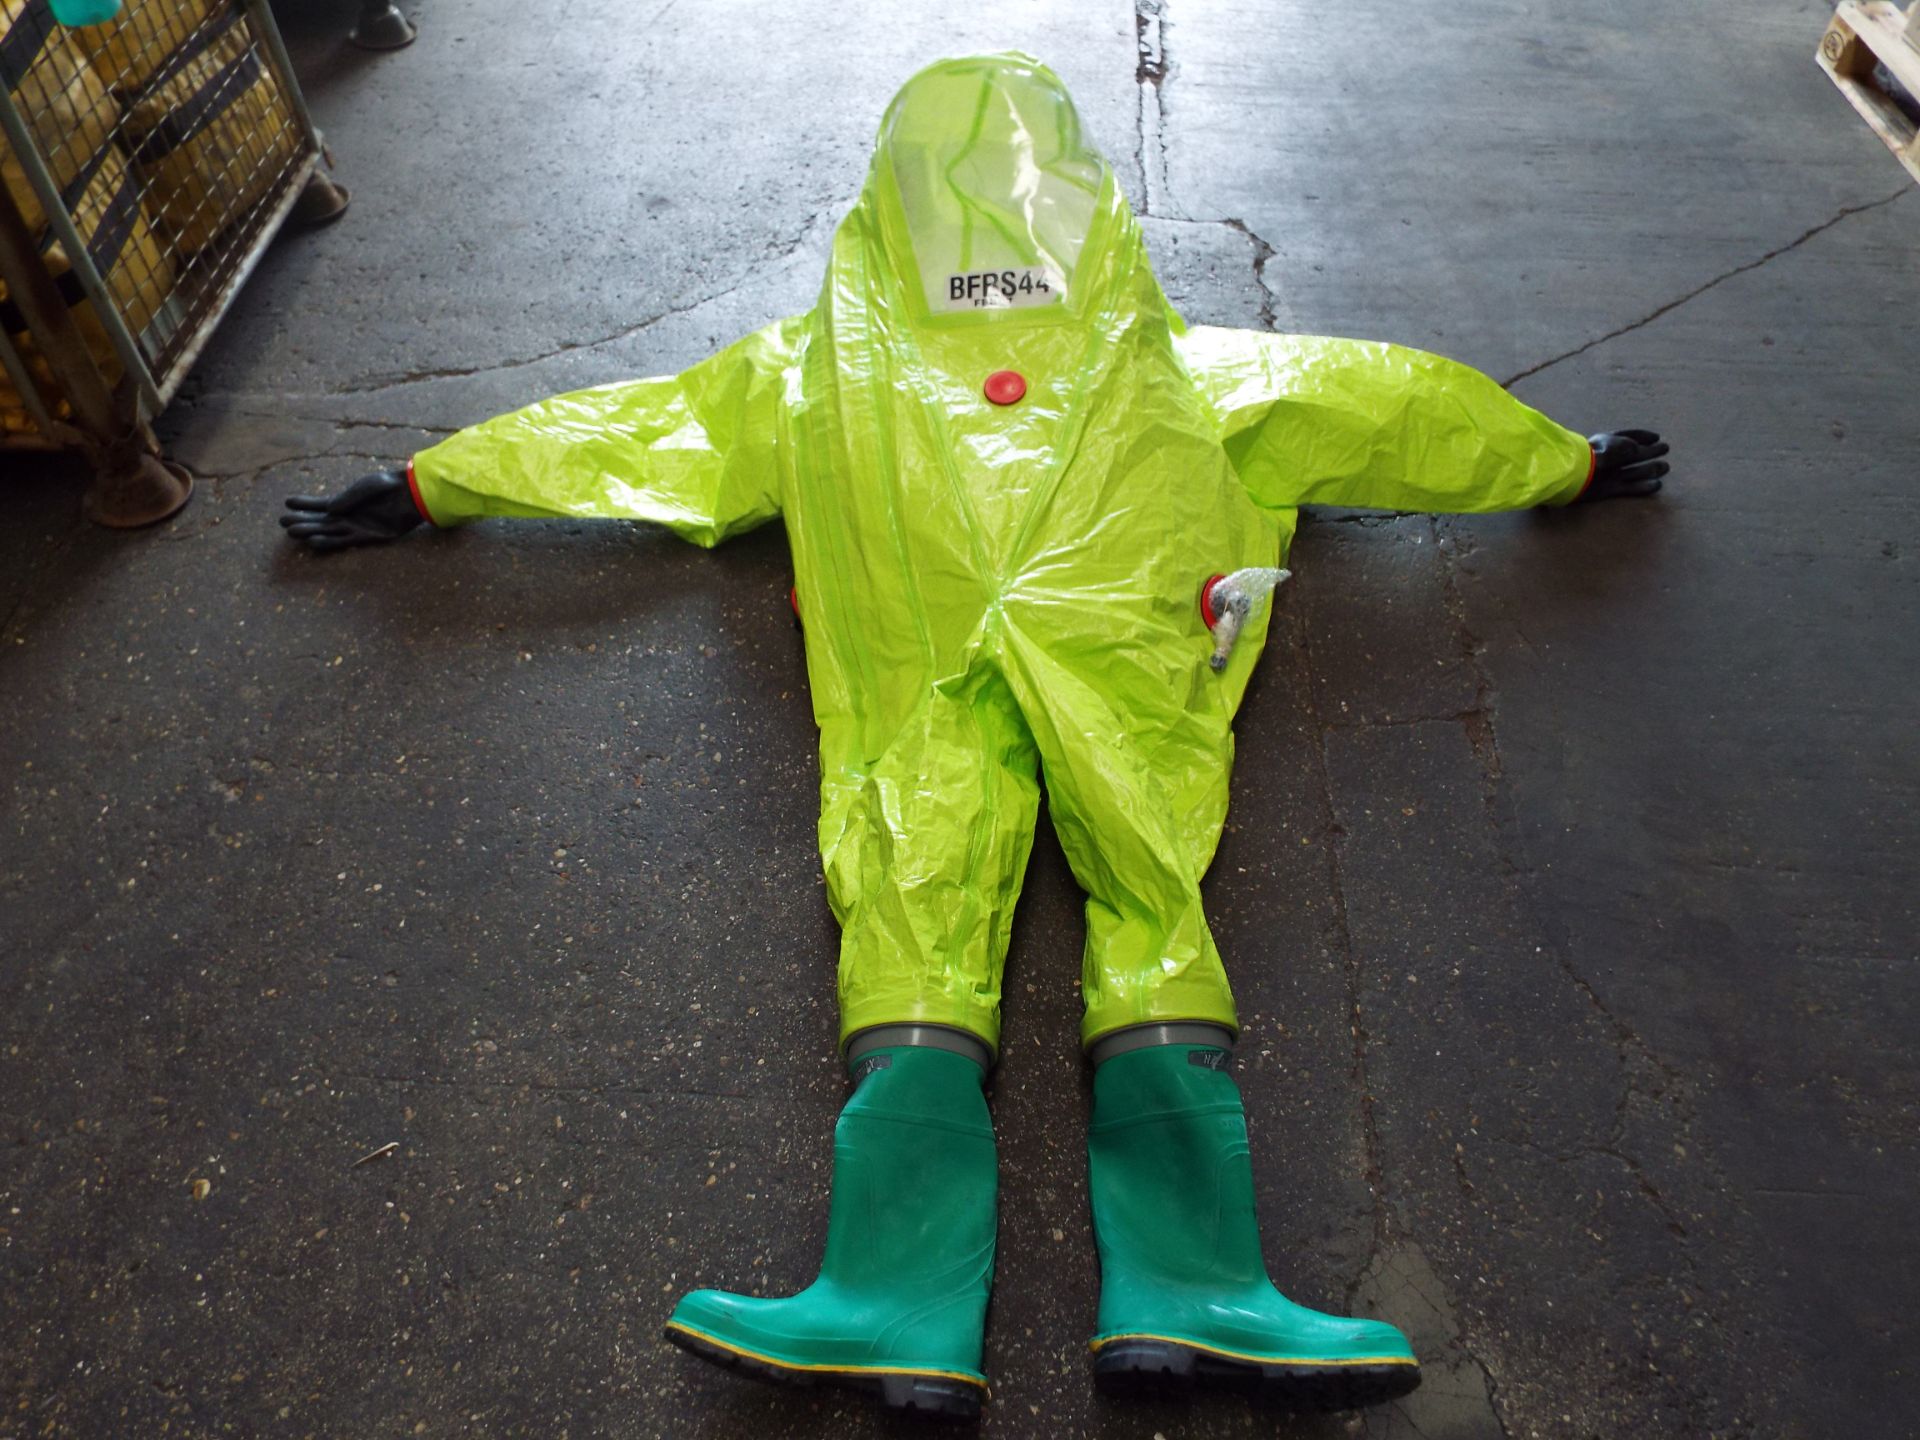 Respirex Tychem TK Gas-Tight Hazmat Suit Type 1A with Attached Boots and Gloves - Image 4 of 13